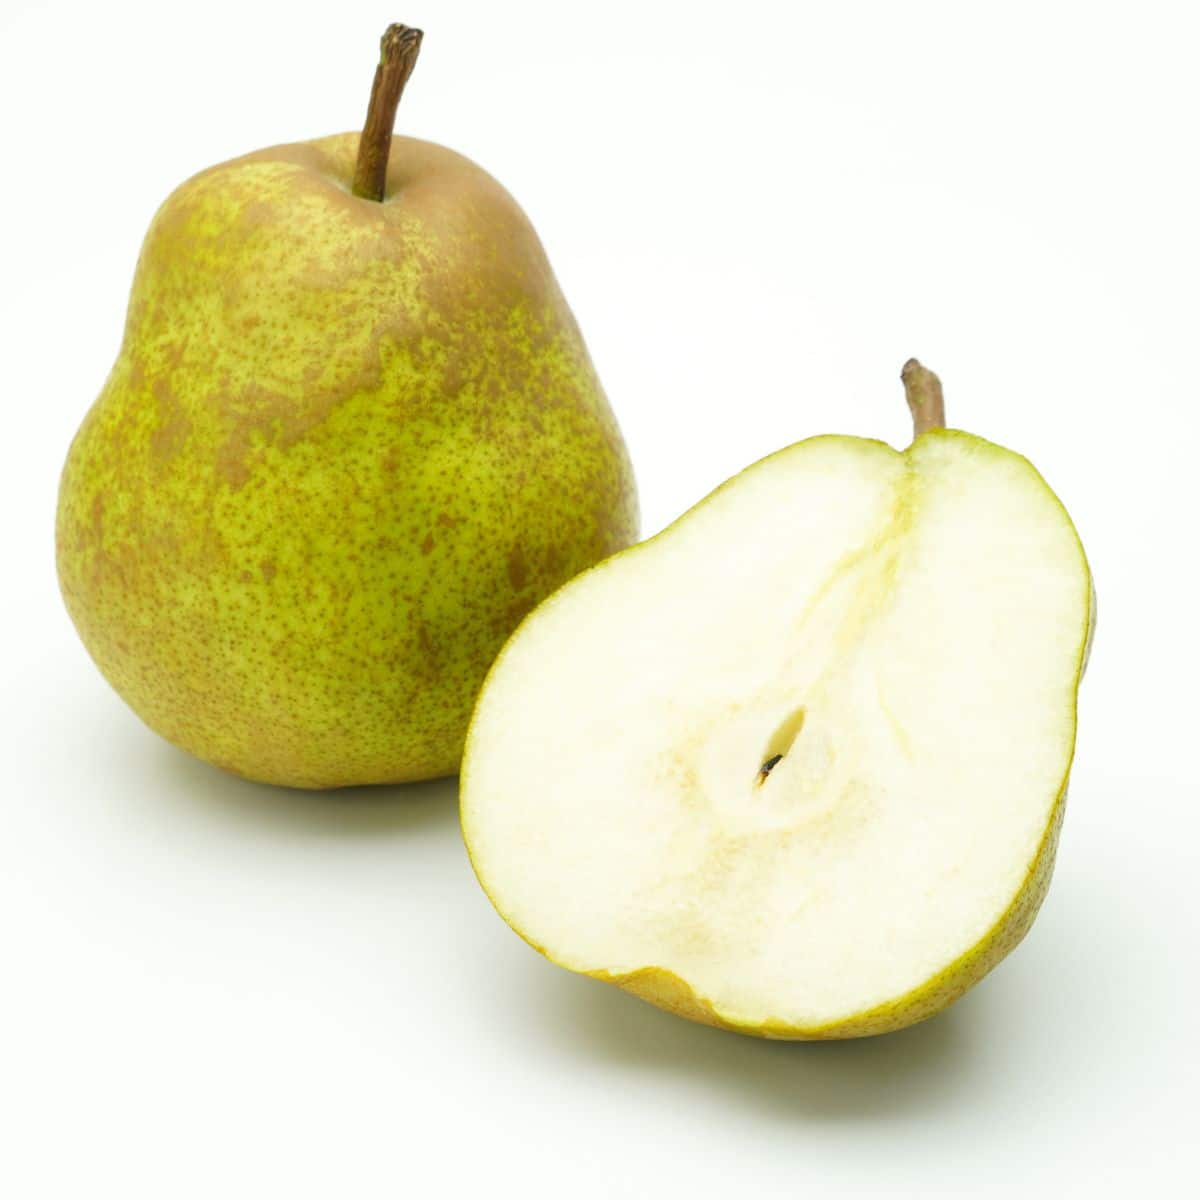 Hood pears on a white background.